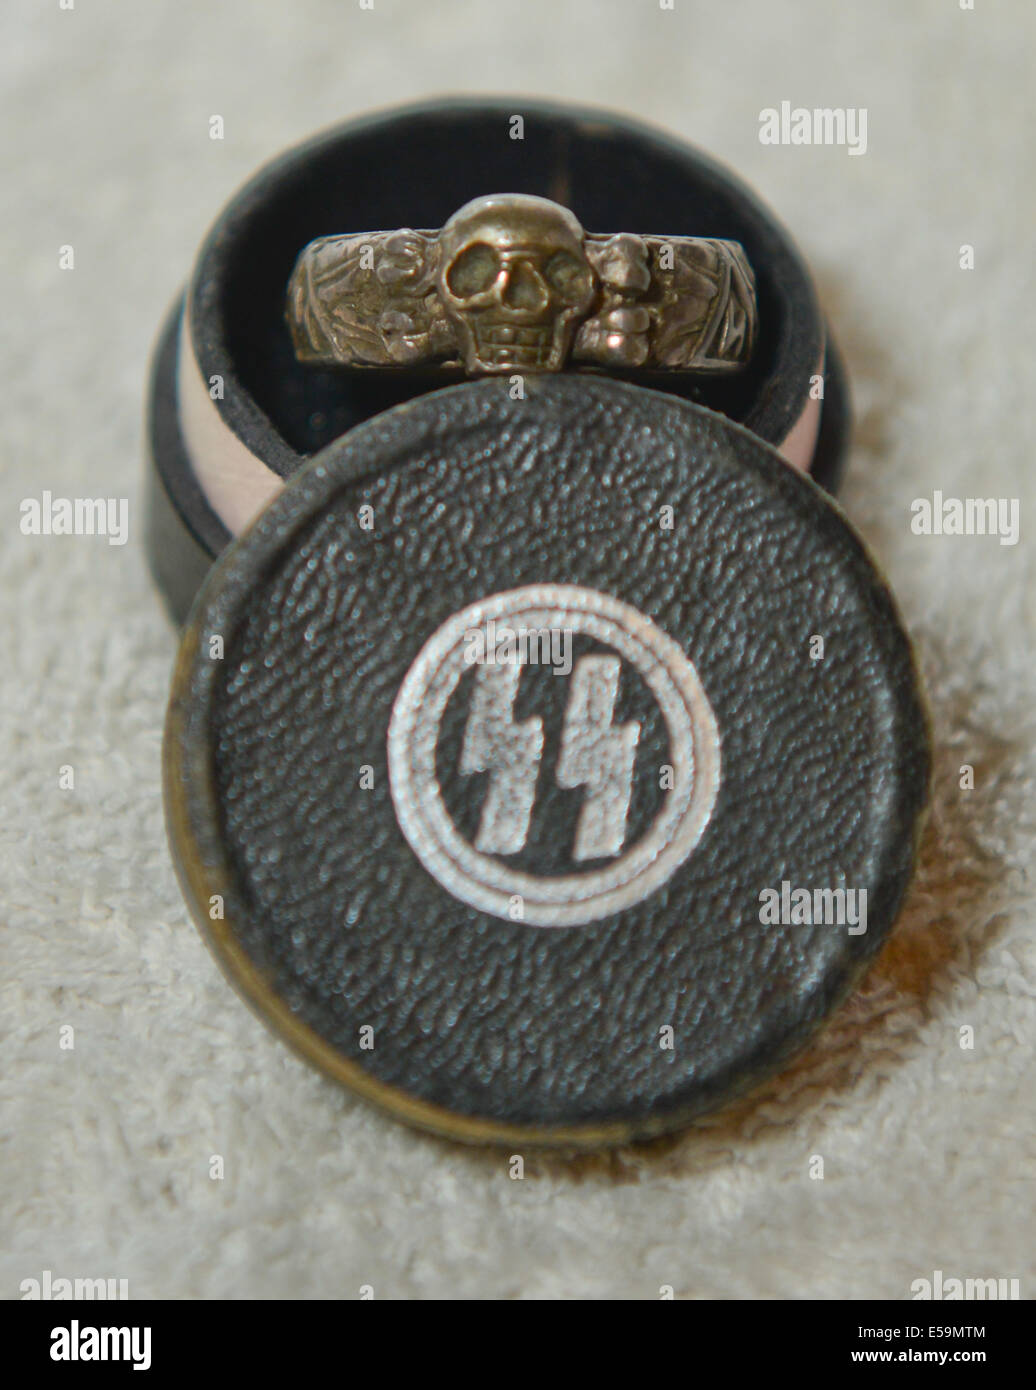 Picture By:Jules Annan Picture Shows:Original Nazi SS Death's Head honour ring and original box Date ; 08/07/2014 Stock Photo